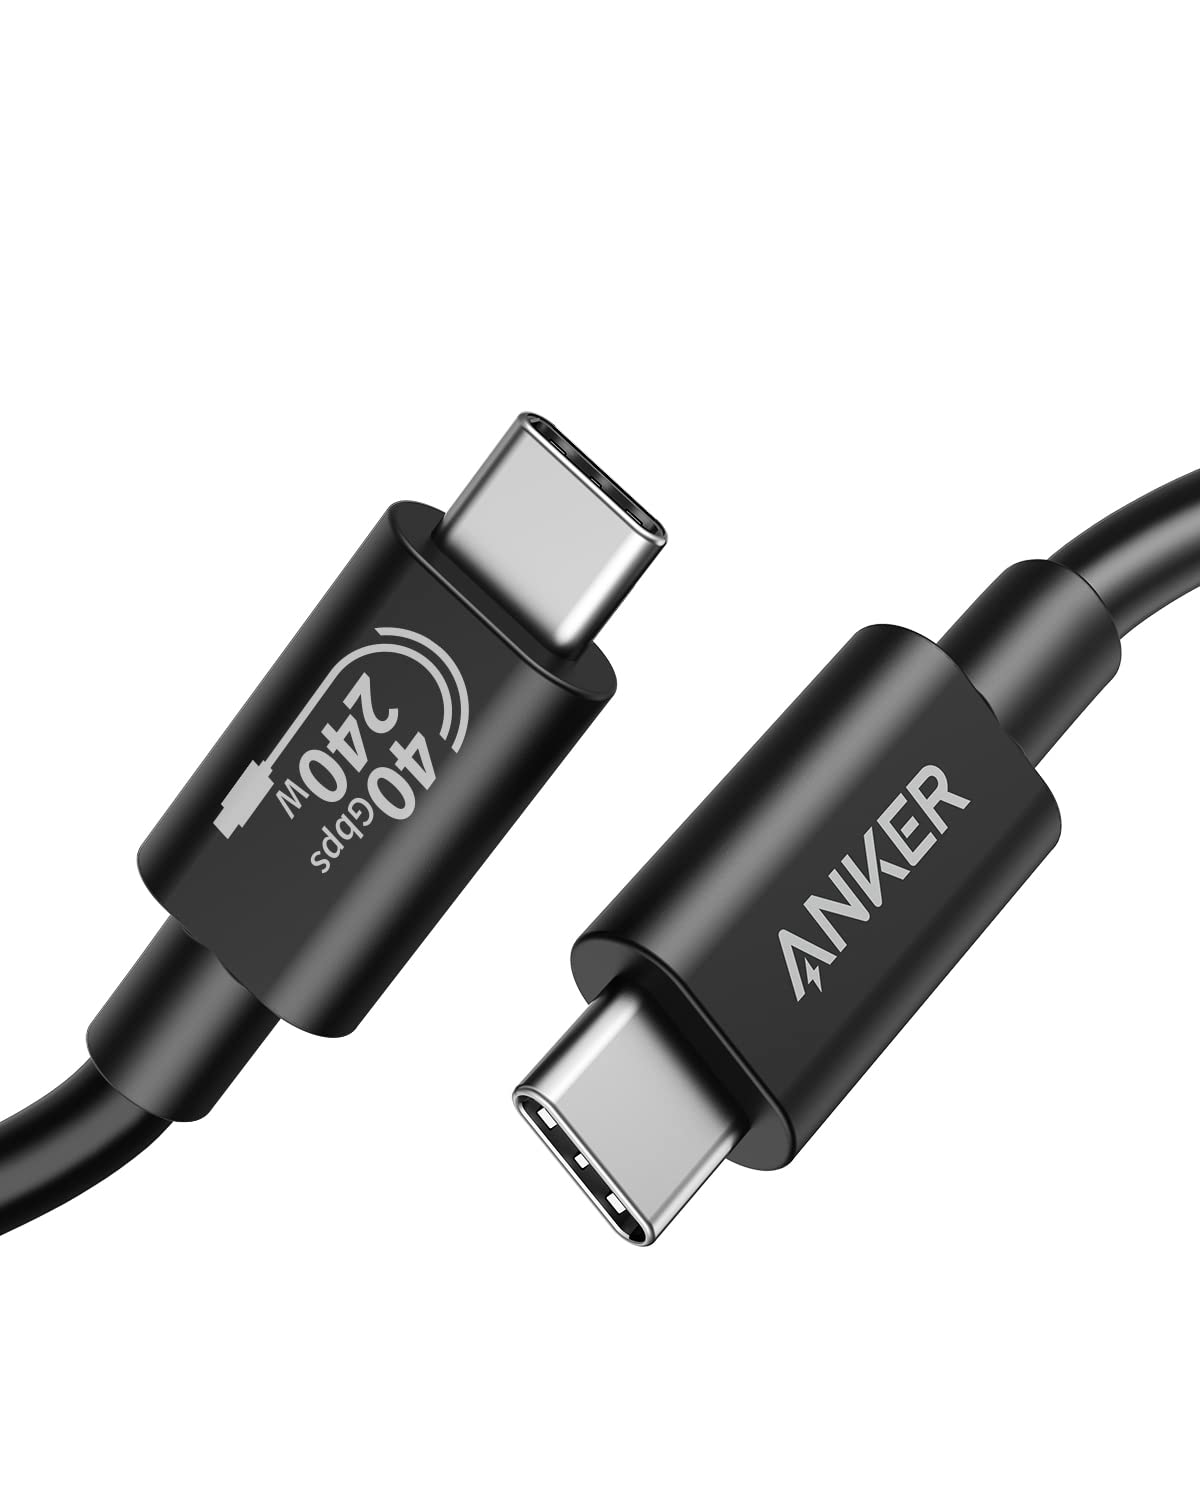 What Are The Types Of USB Cables And How To Identify Them? - Anker US